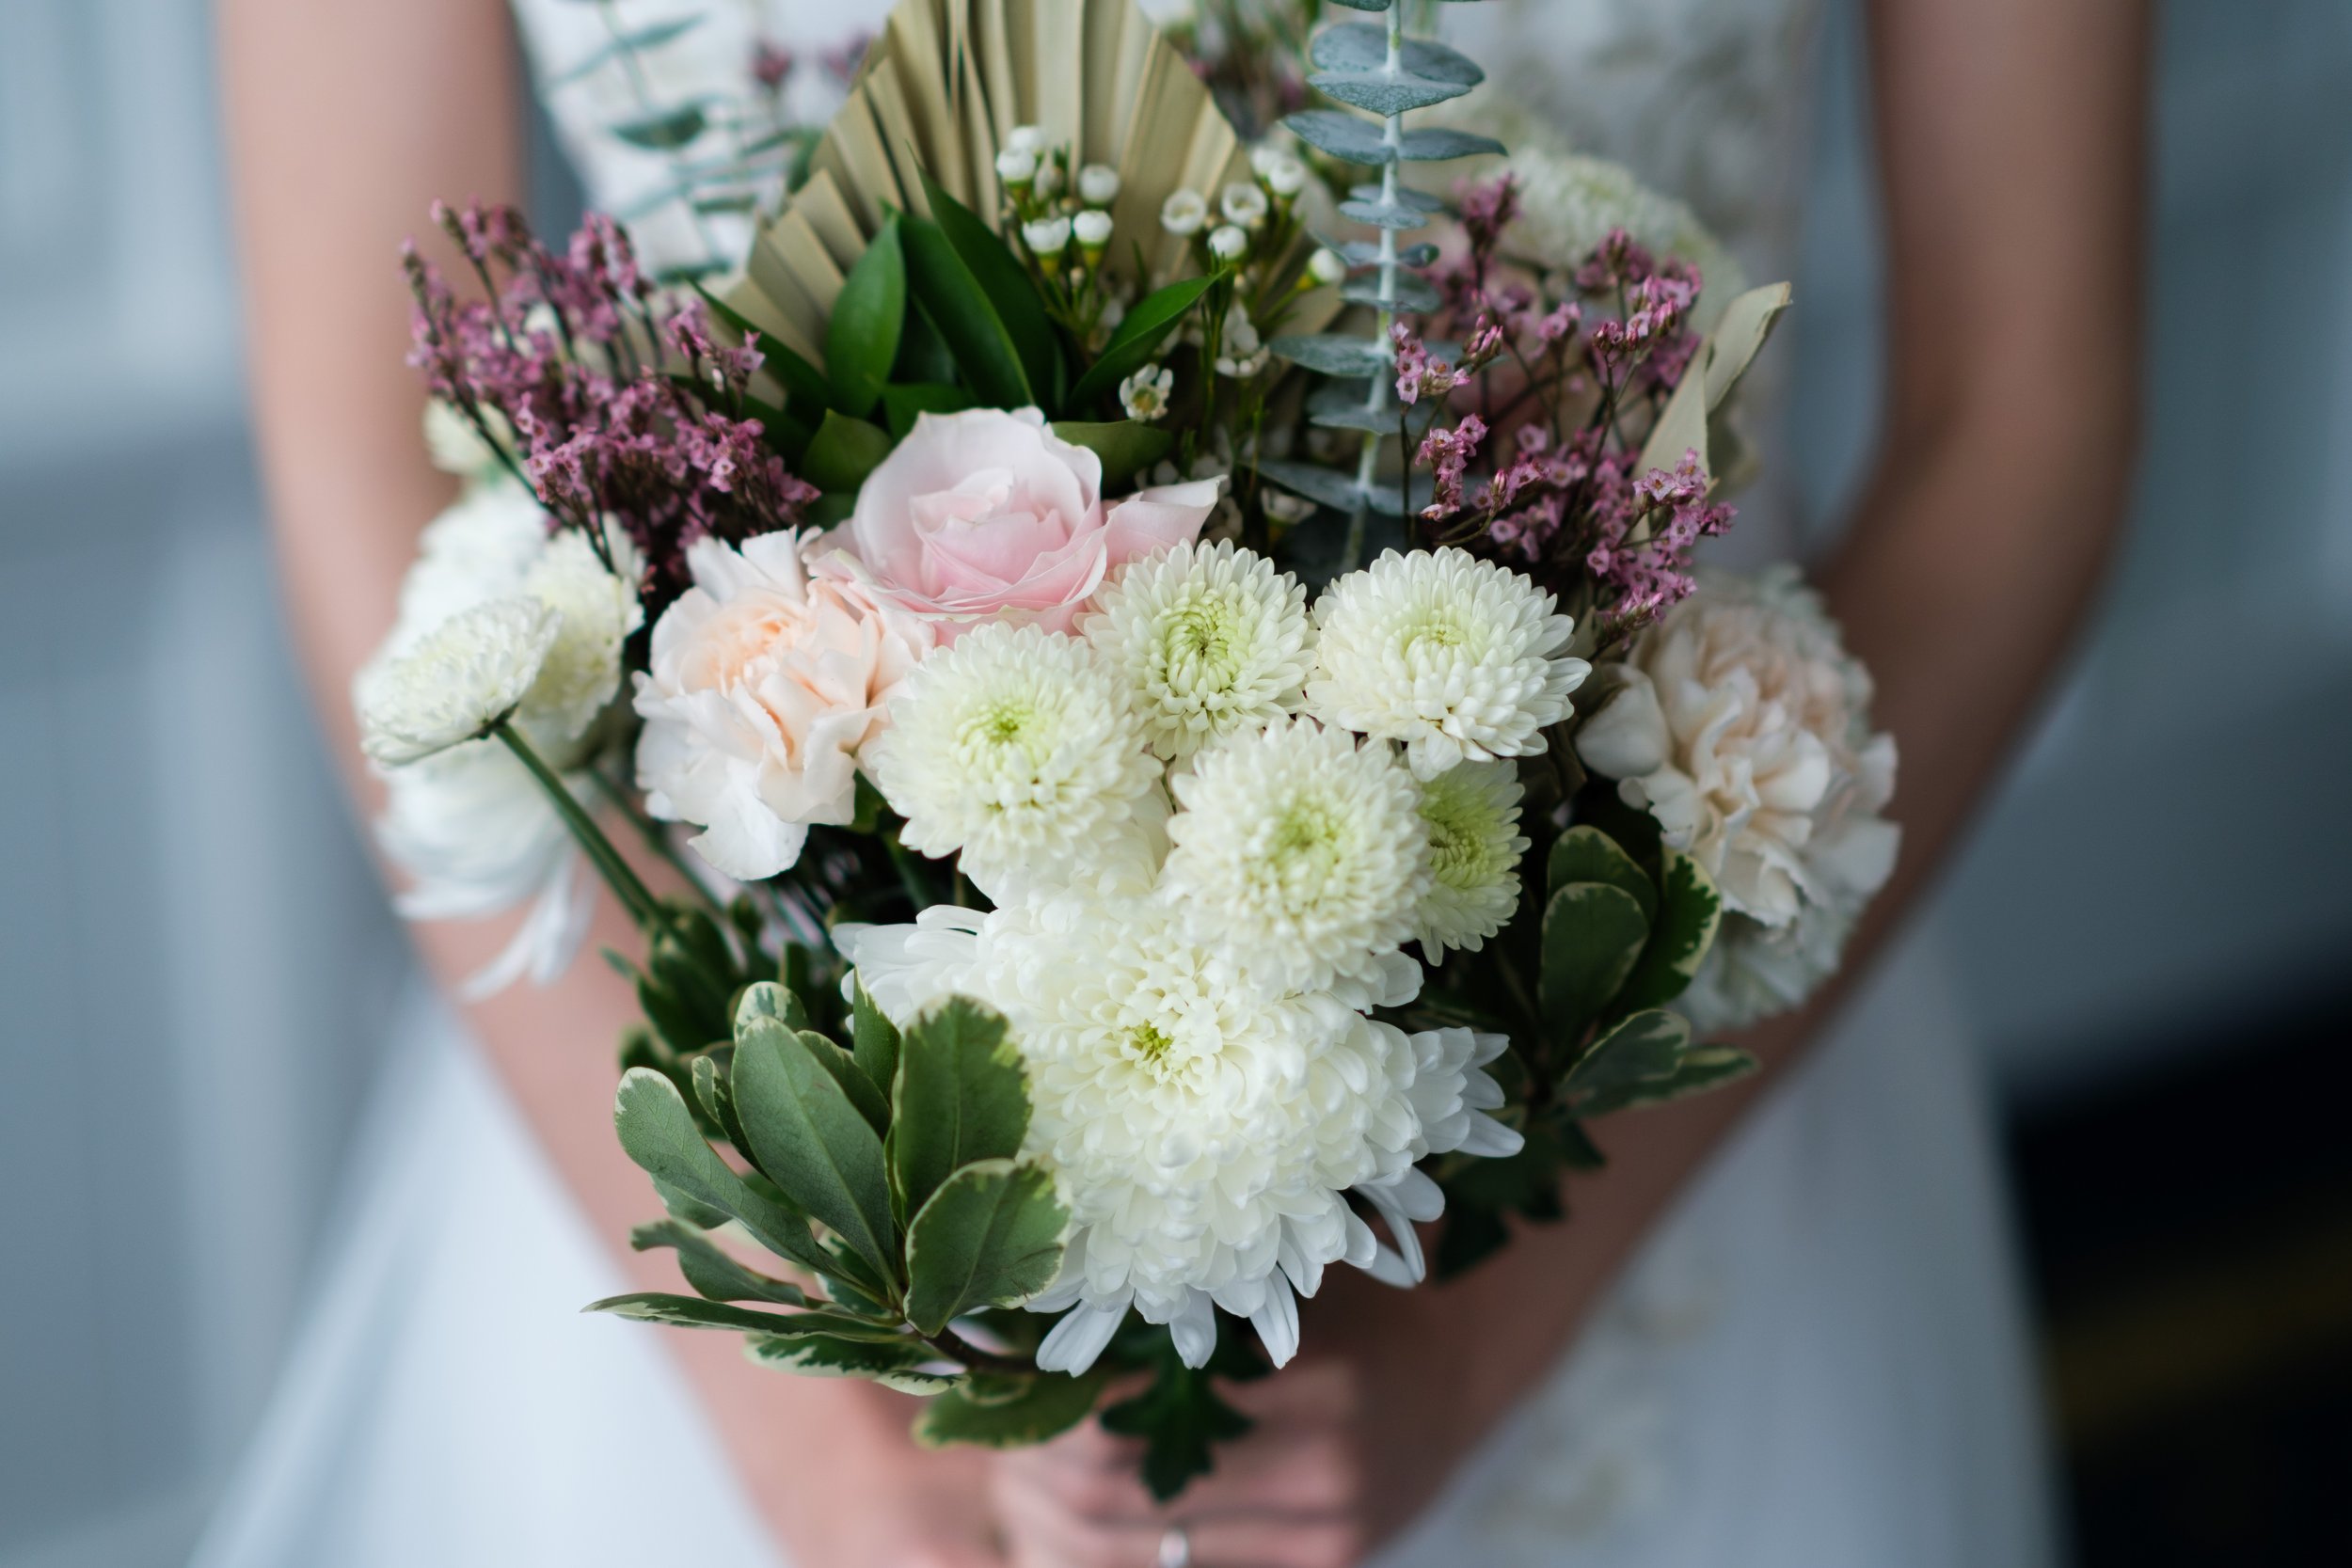  A colour wedding detail  photograph of Rocio’s wedding floral bouquet before her wedding at the Royal Canadian Yacht Club by Toronto wedding photographer Scott Williams  